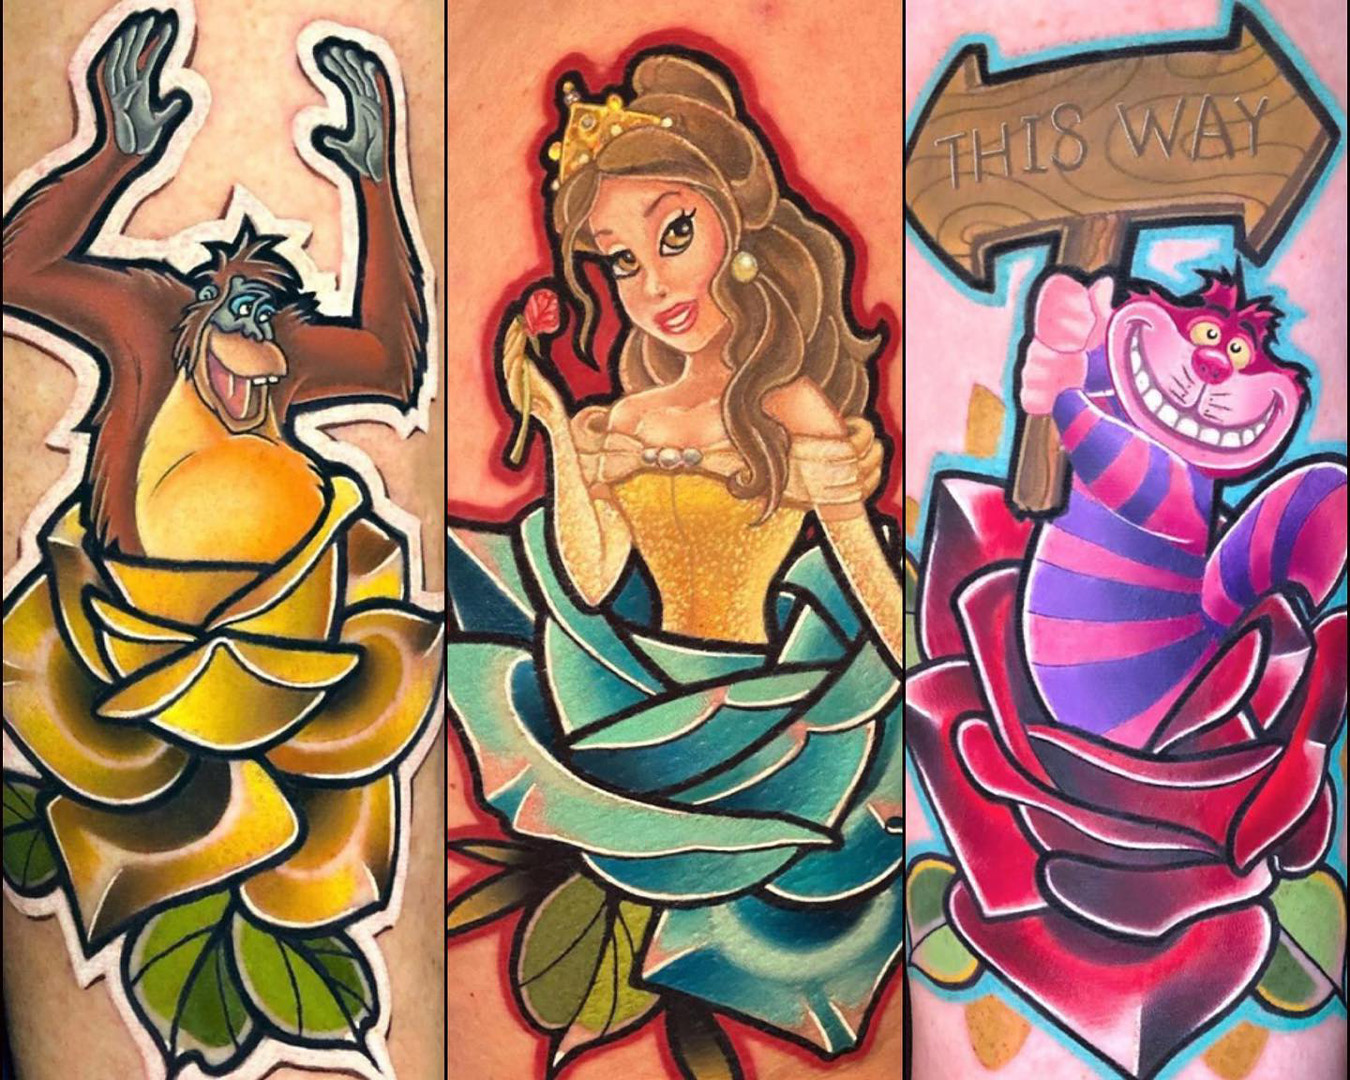 Illustrative sticker tattoos of disney characters on roses